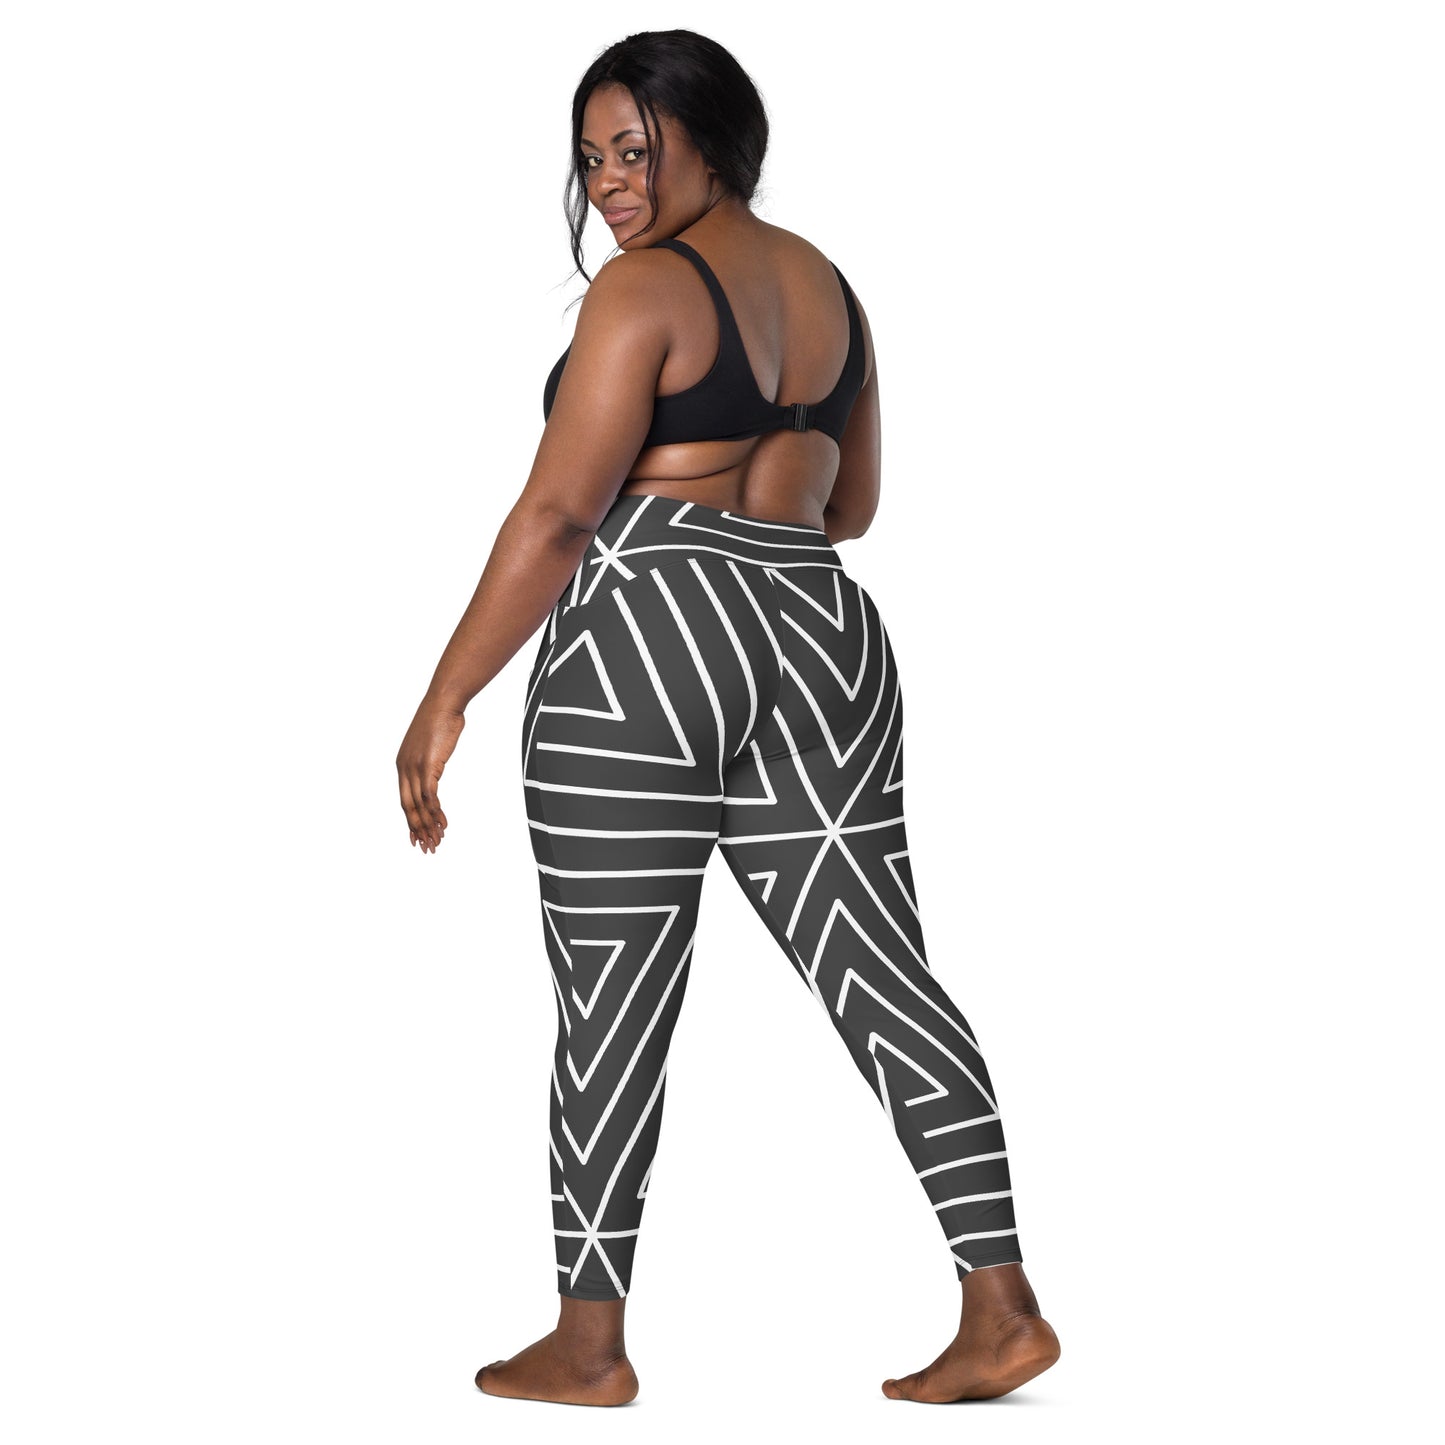 Angles Crossover leggings with pockets